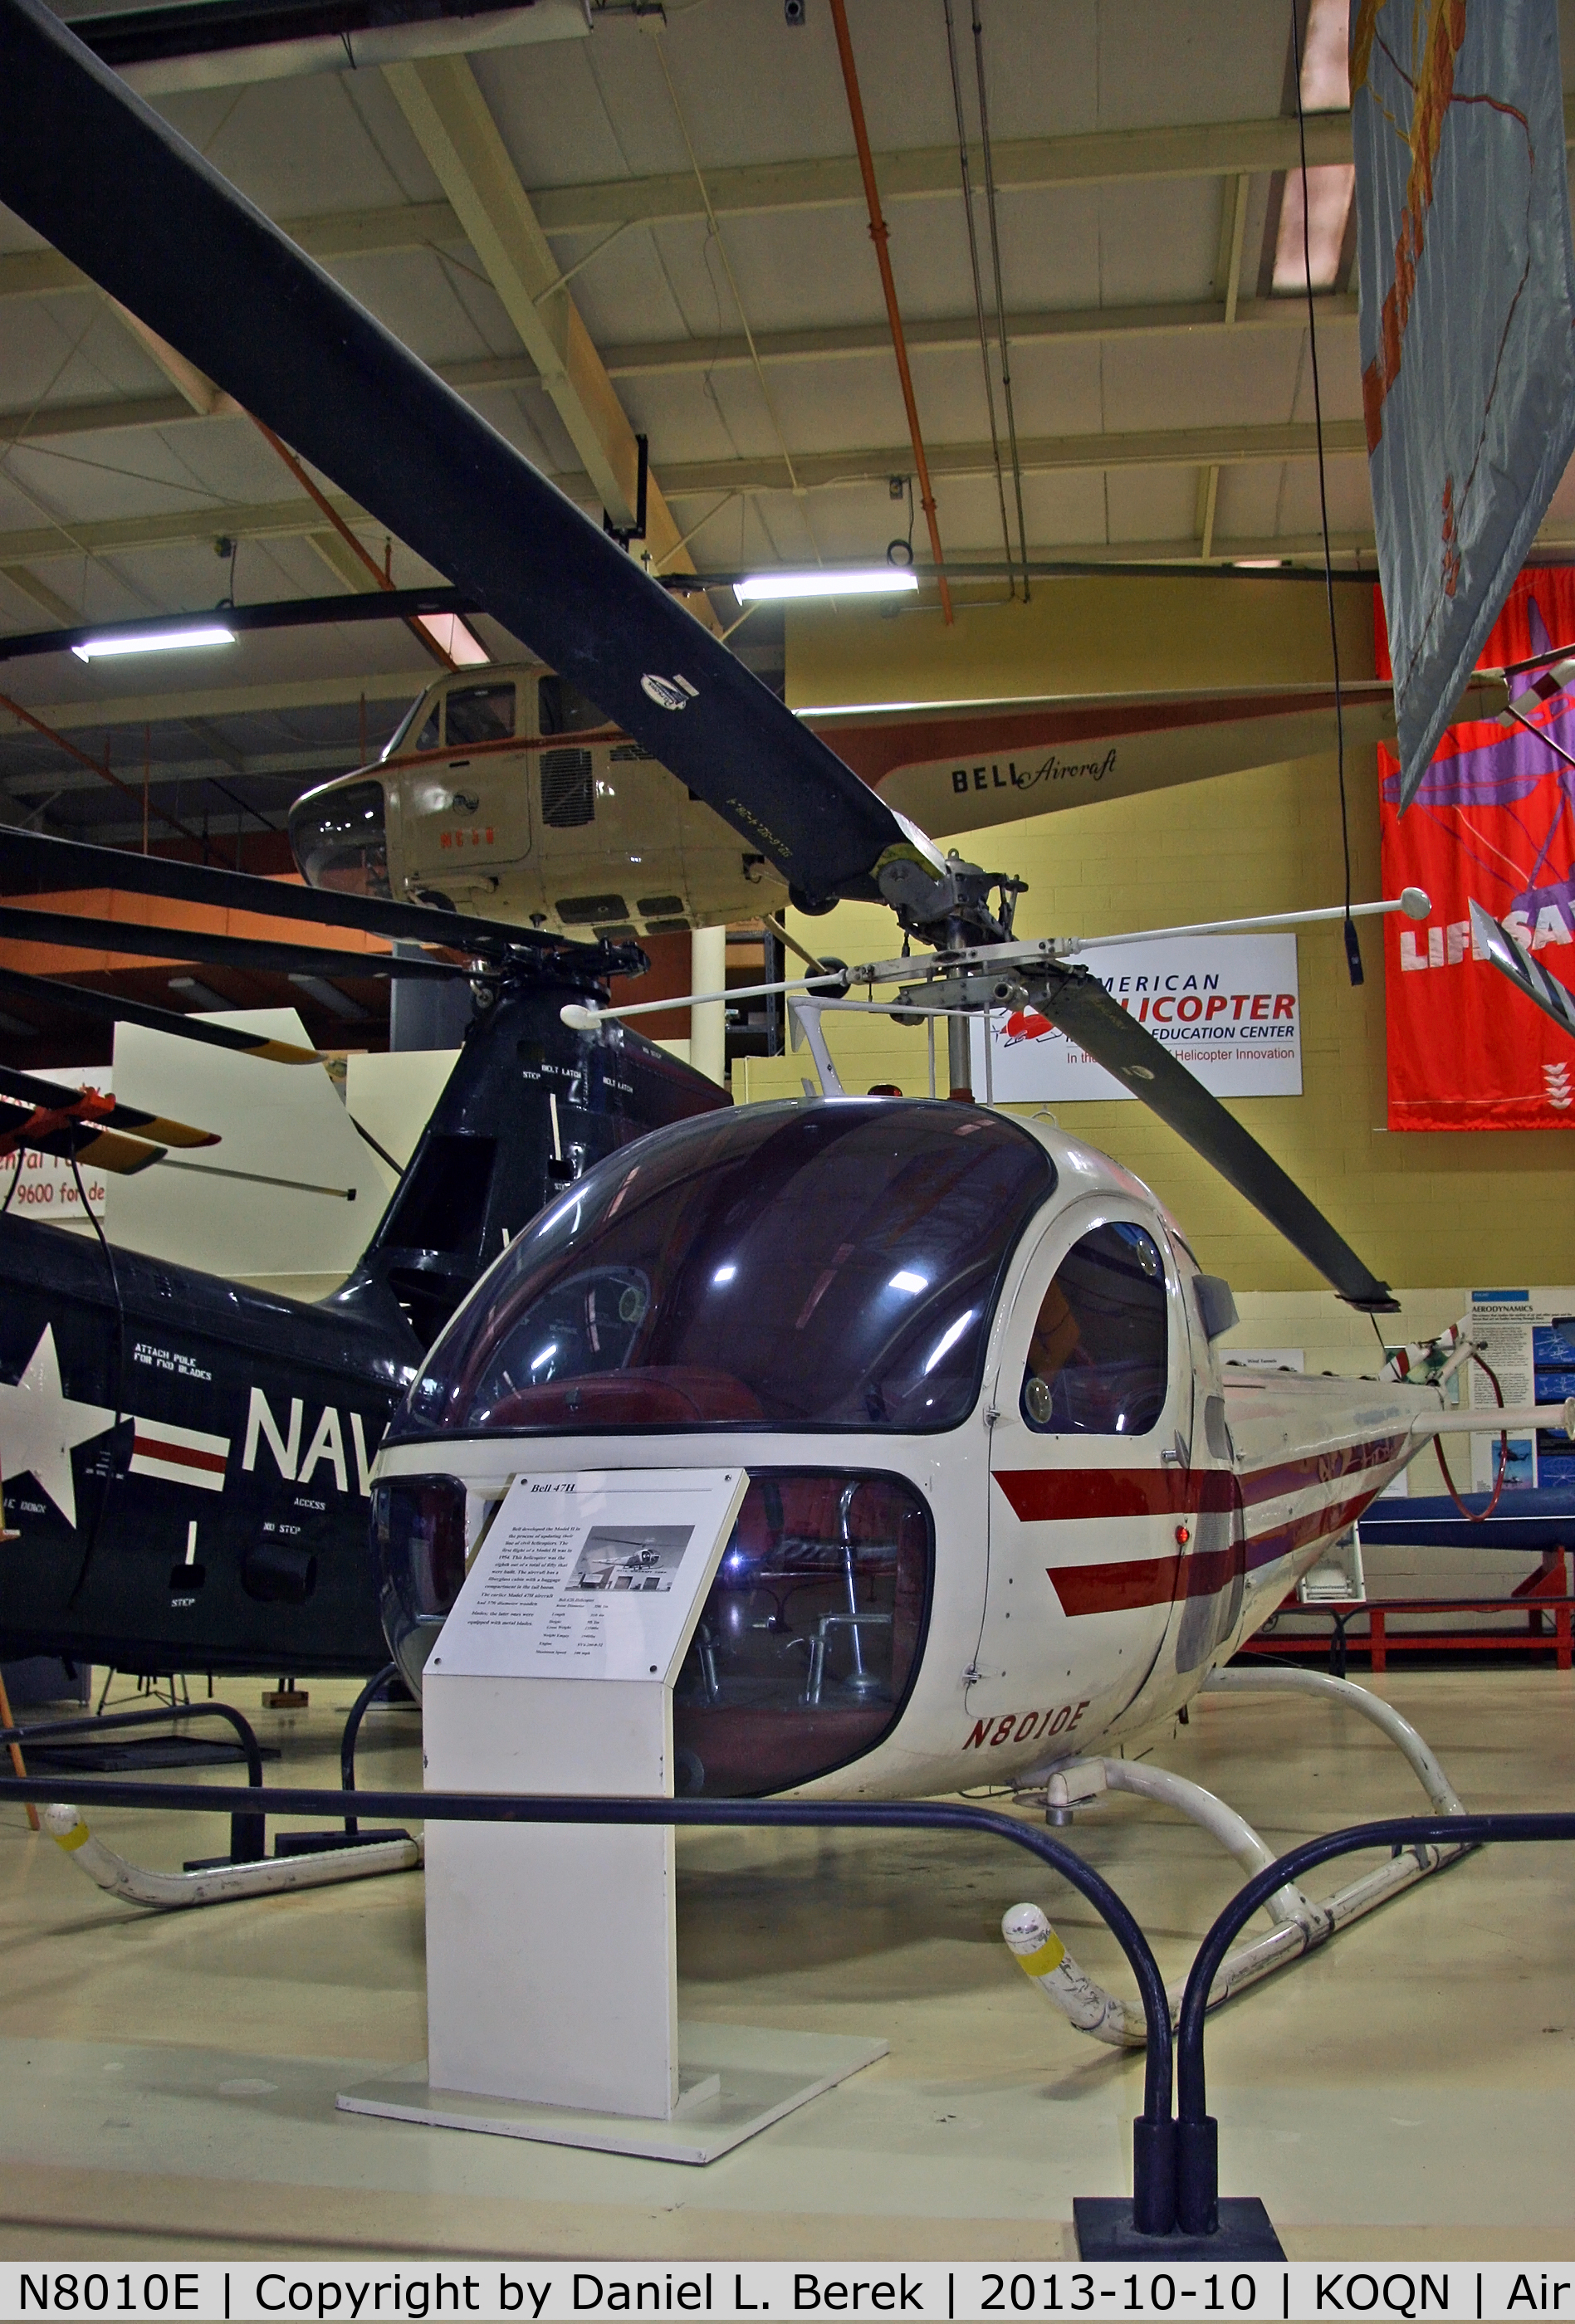 N8010E, 1947 Bell 47H-1 C/N 1355, This beautiful classic is on display at the American Helicopter Museum.